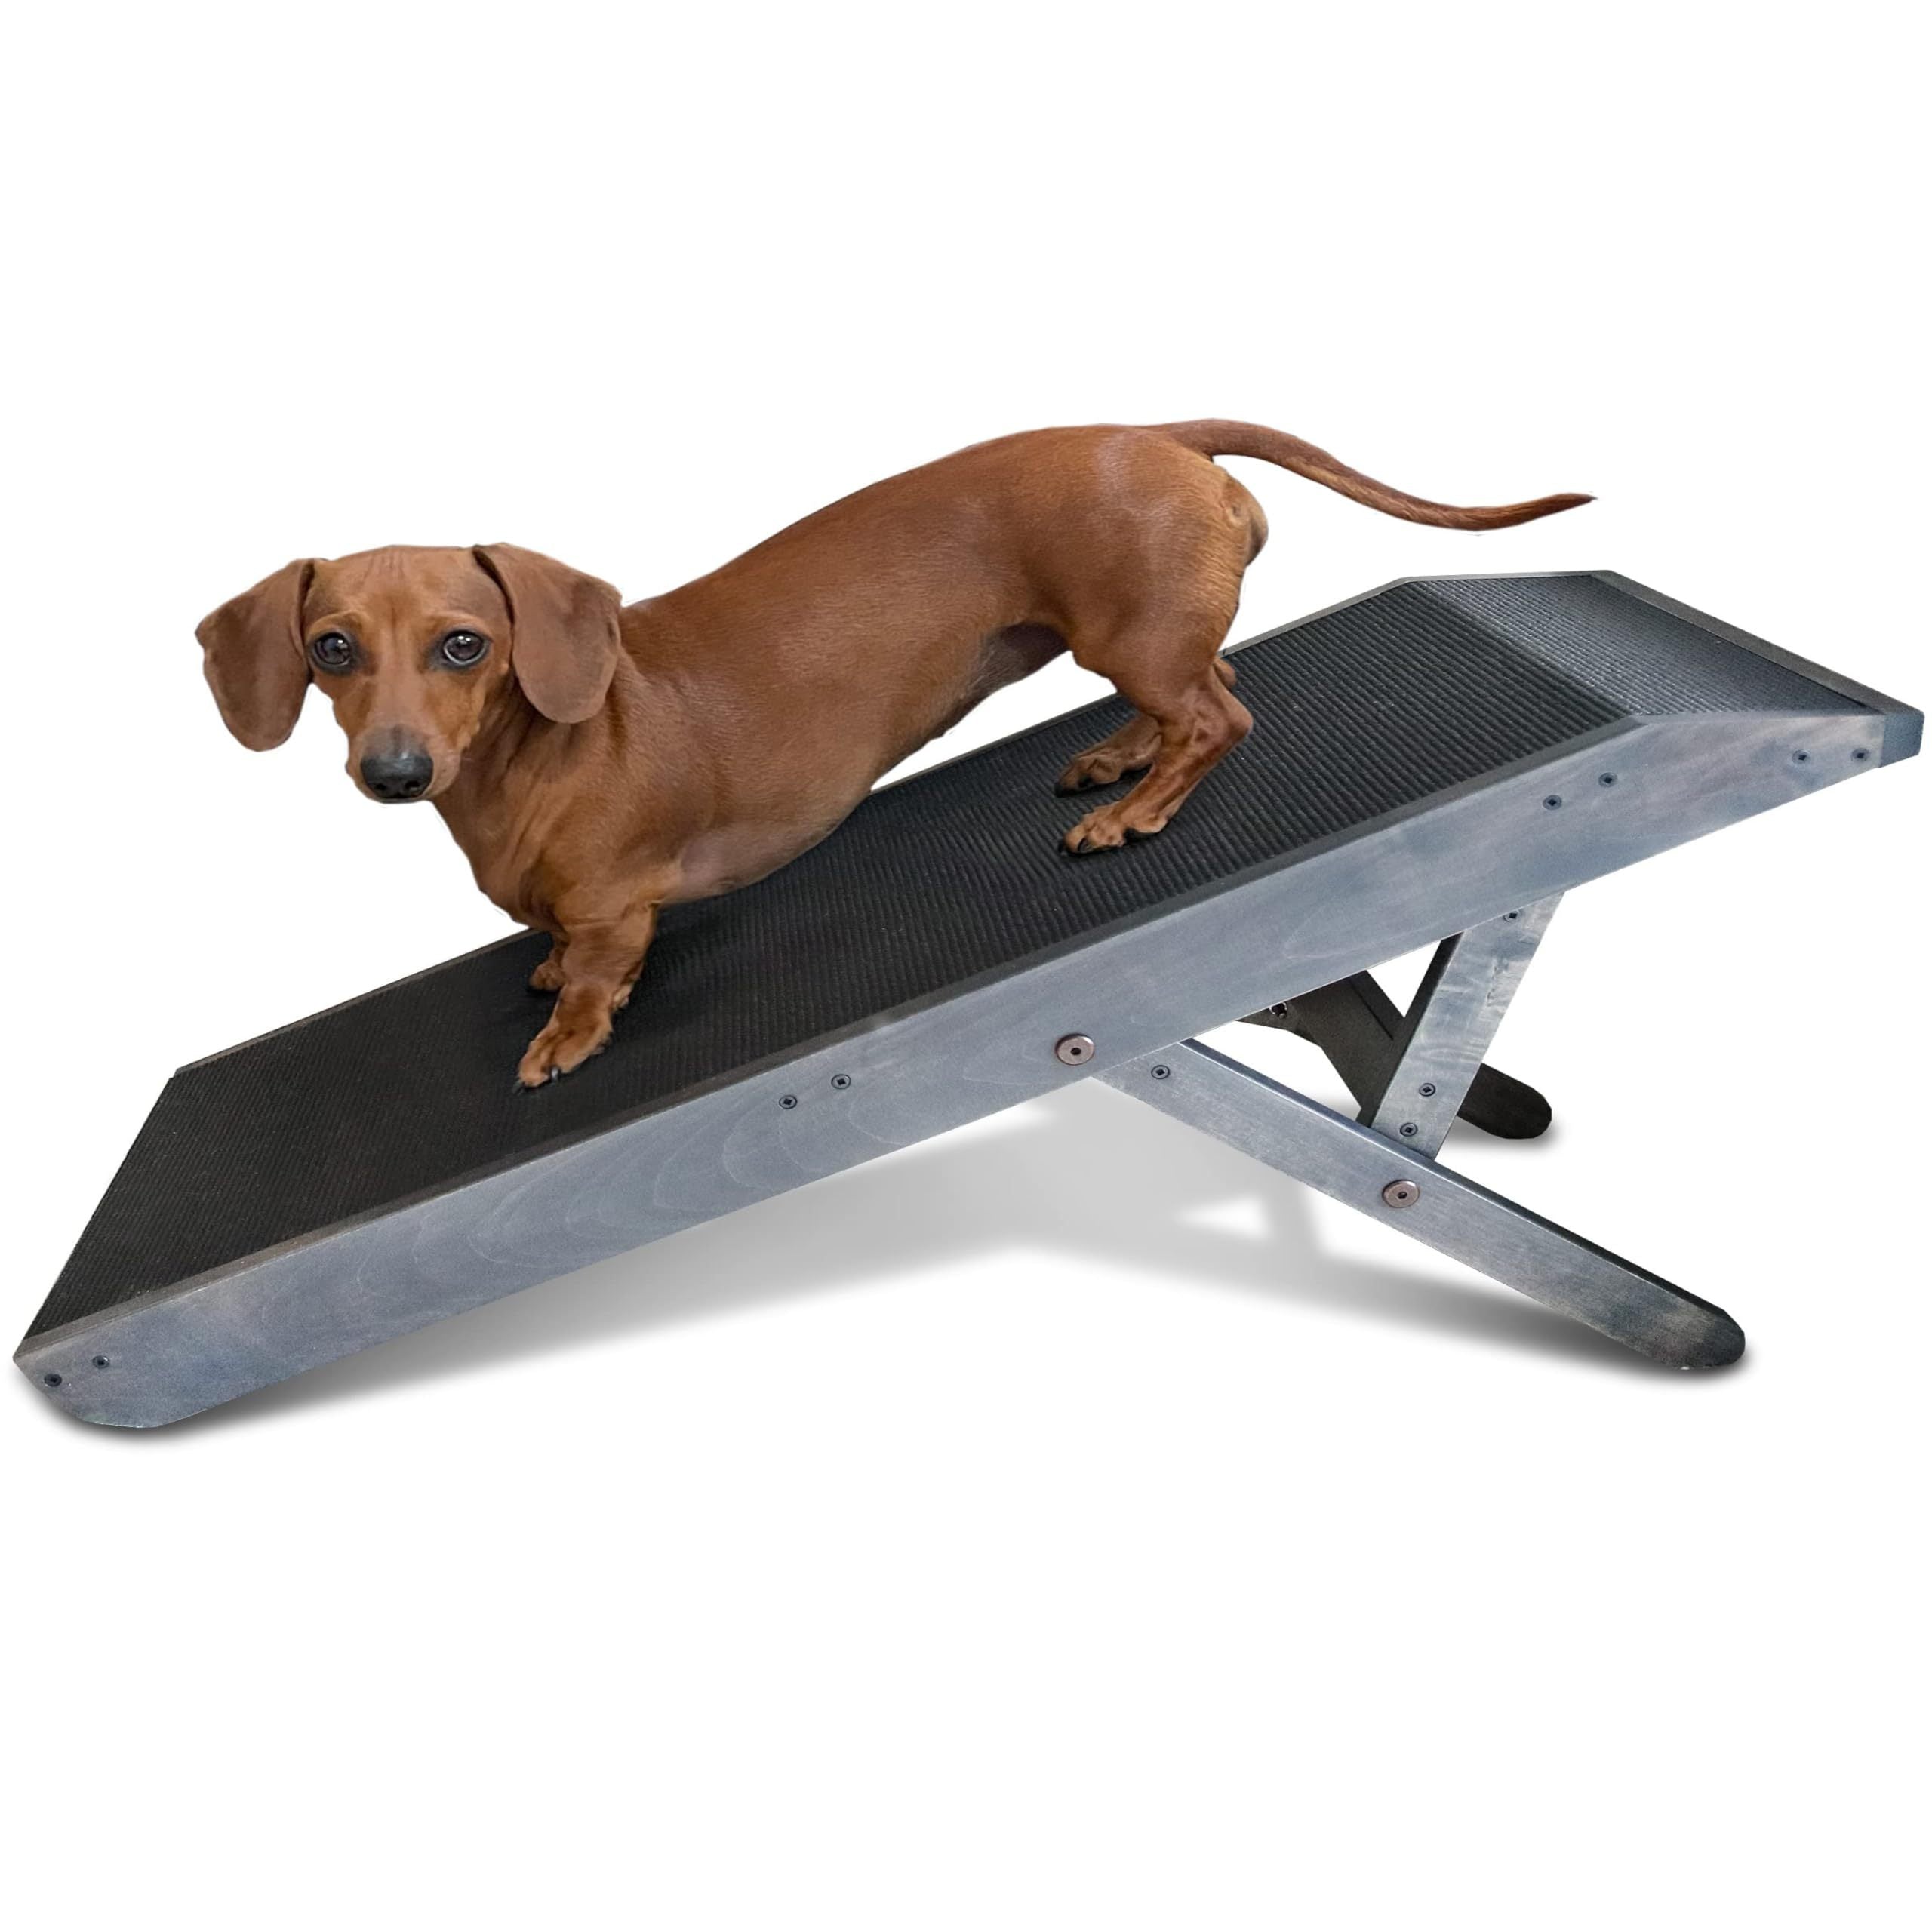 Youfun Adjustable Dog Ramp For Bed Small Dog & Large Dogs - 24 H Folding Dachshund Ramp Hardwood Pet Ramp For Couch With Platform Top   Anti-Slip Surface - 47  L Dog Ramps For Medium Dogs & Old Cats